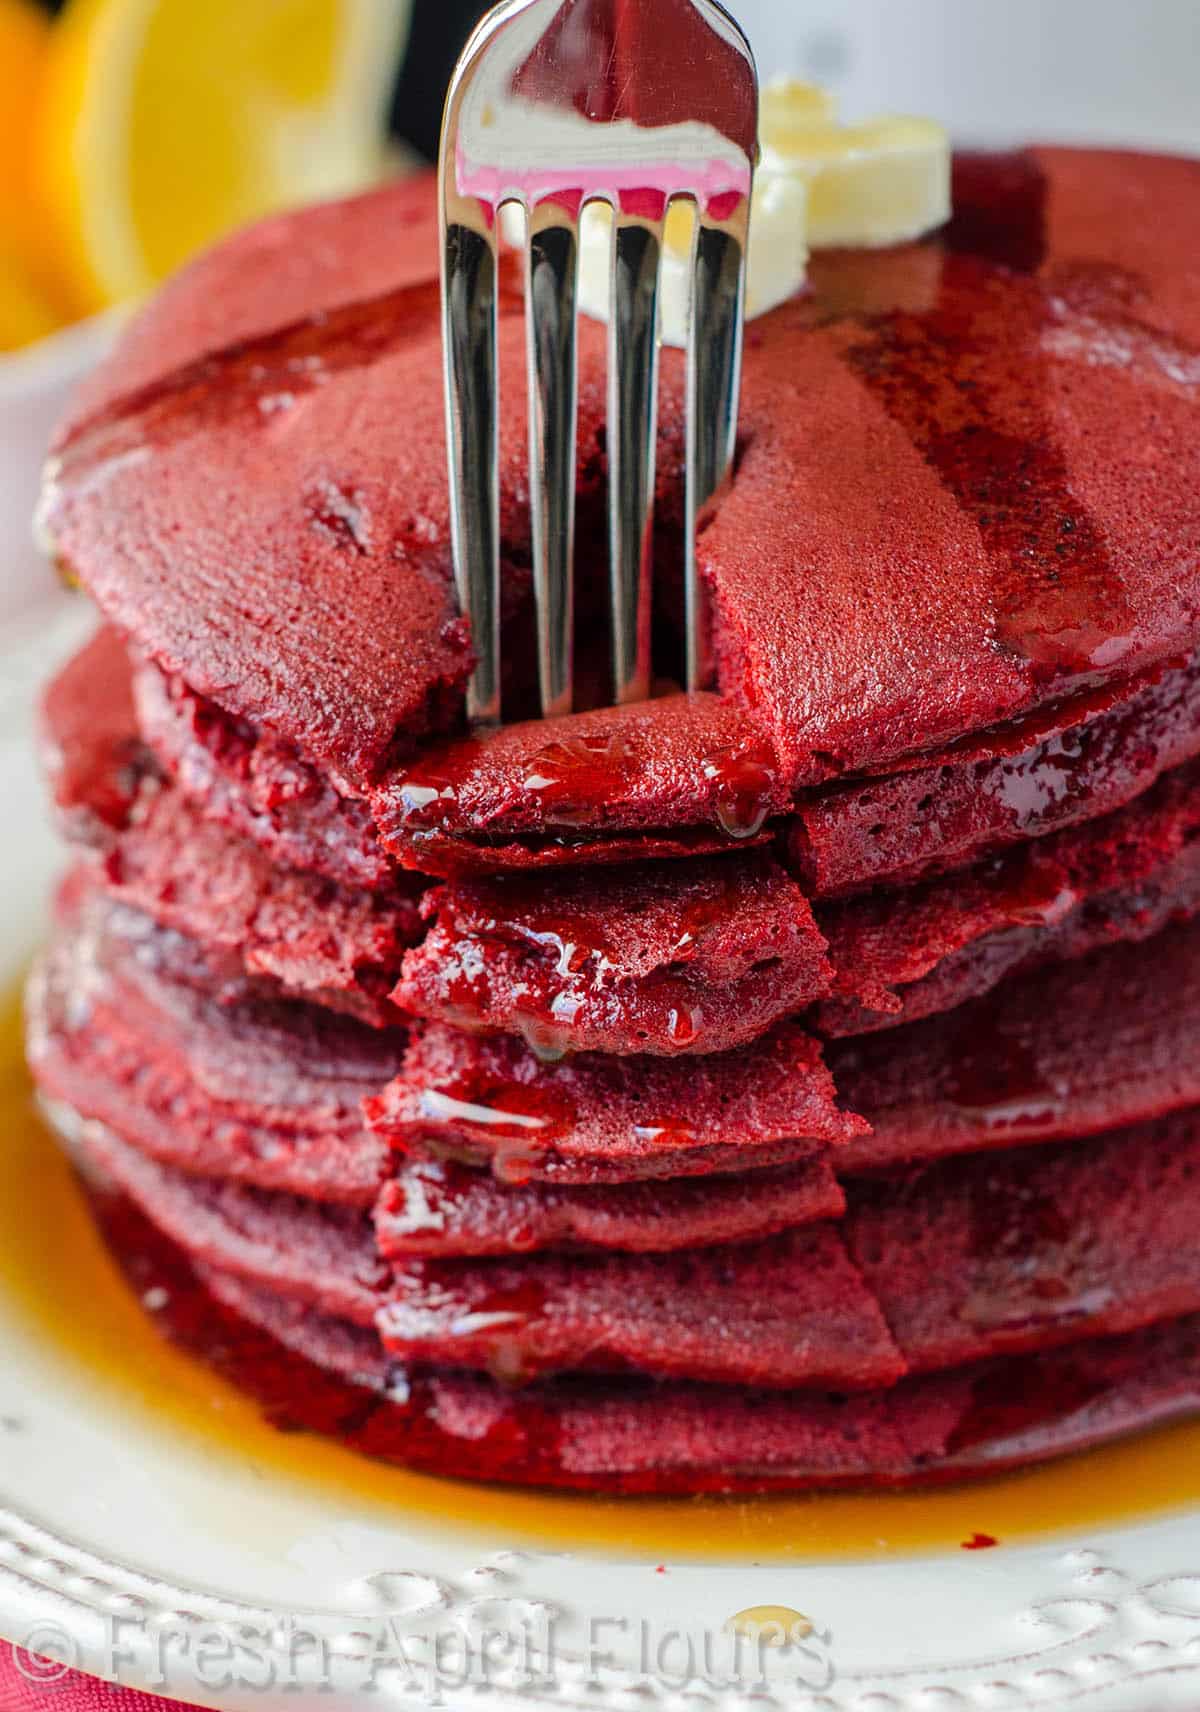 A fork digging into a stack of red velvet cake mix pancakes with syrup dripping down the stack.